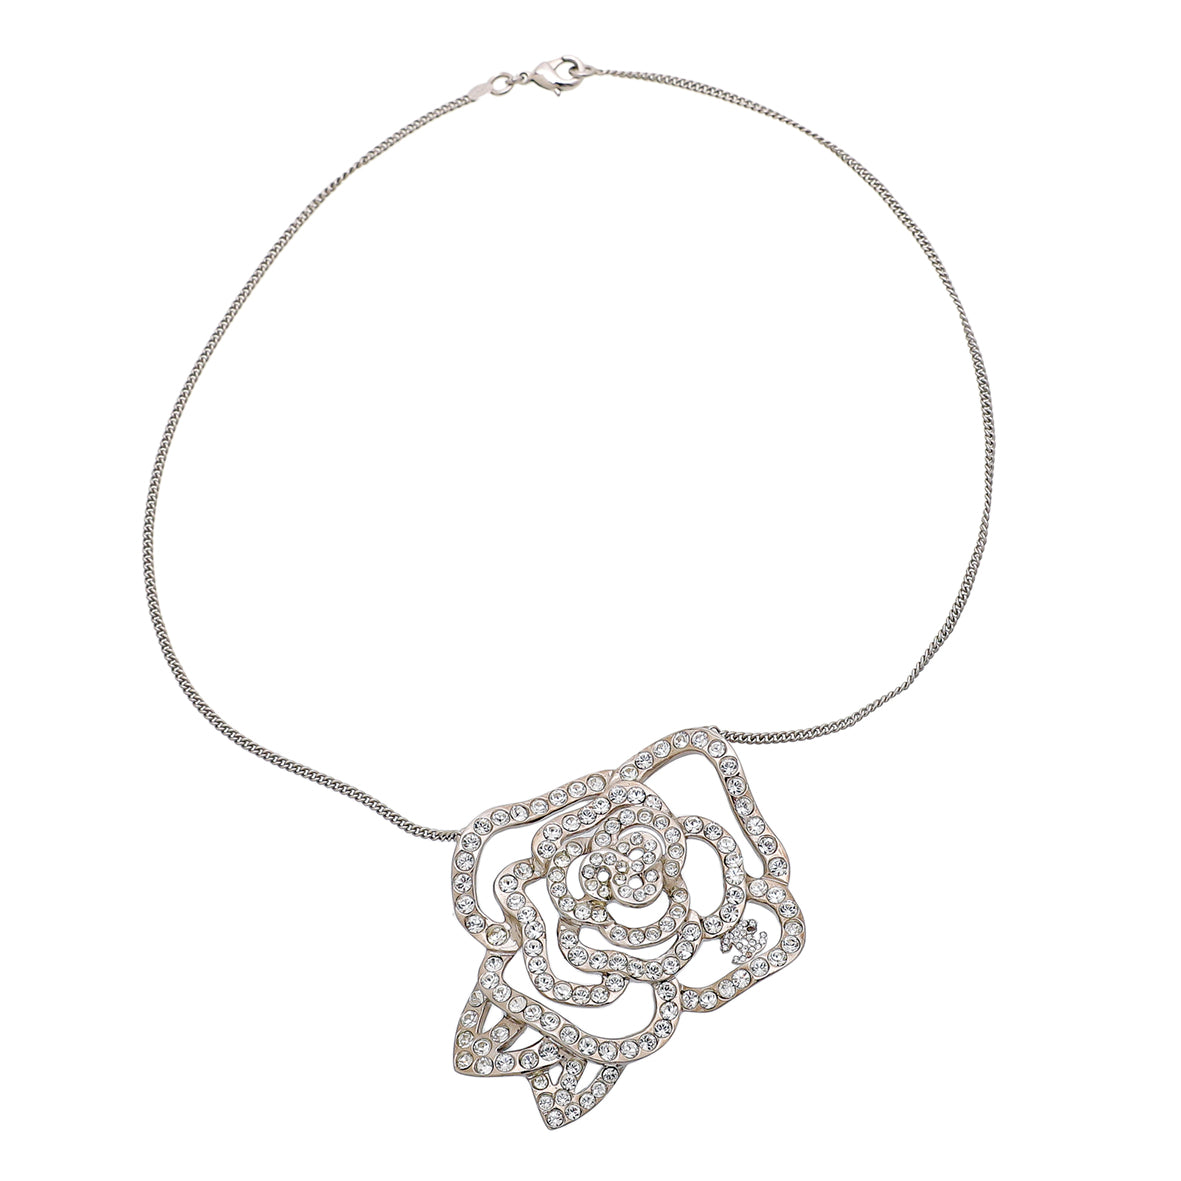 Chanel White Crystal Camellia Pendant Necklace